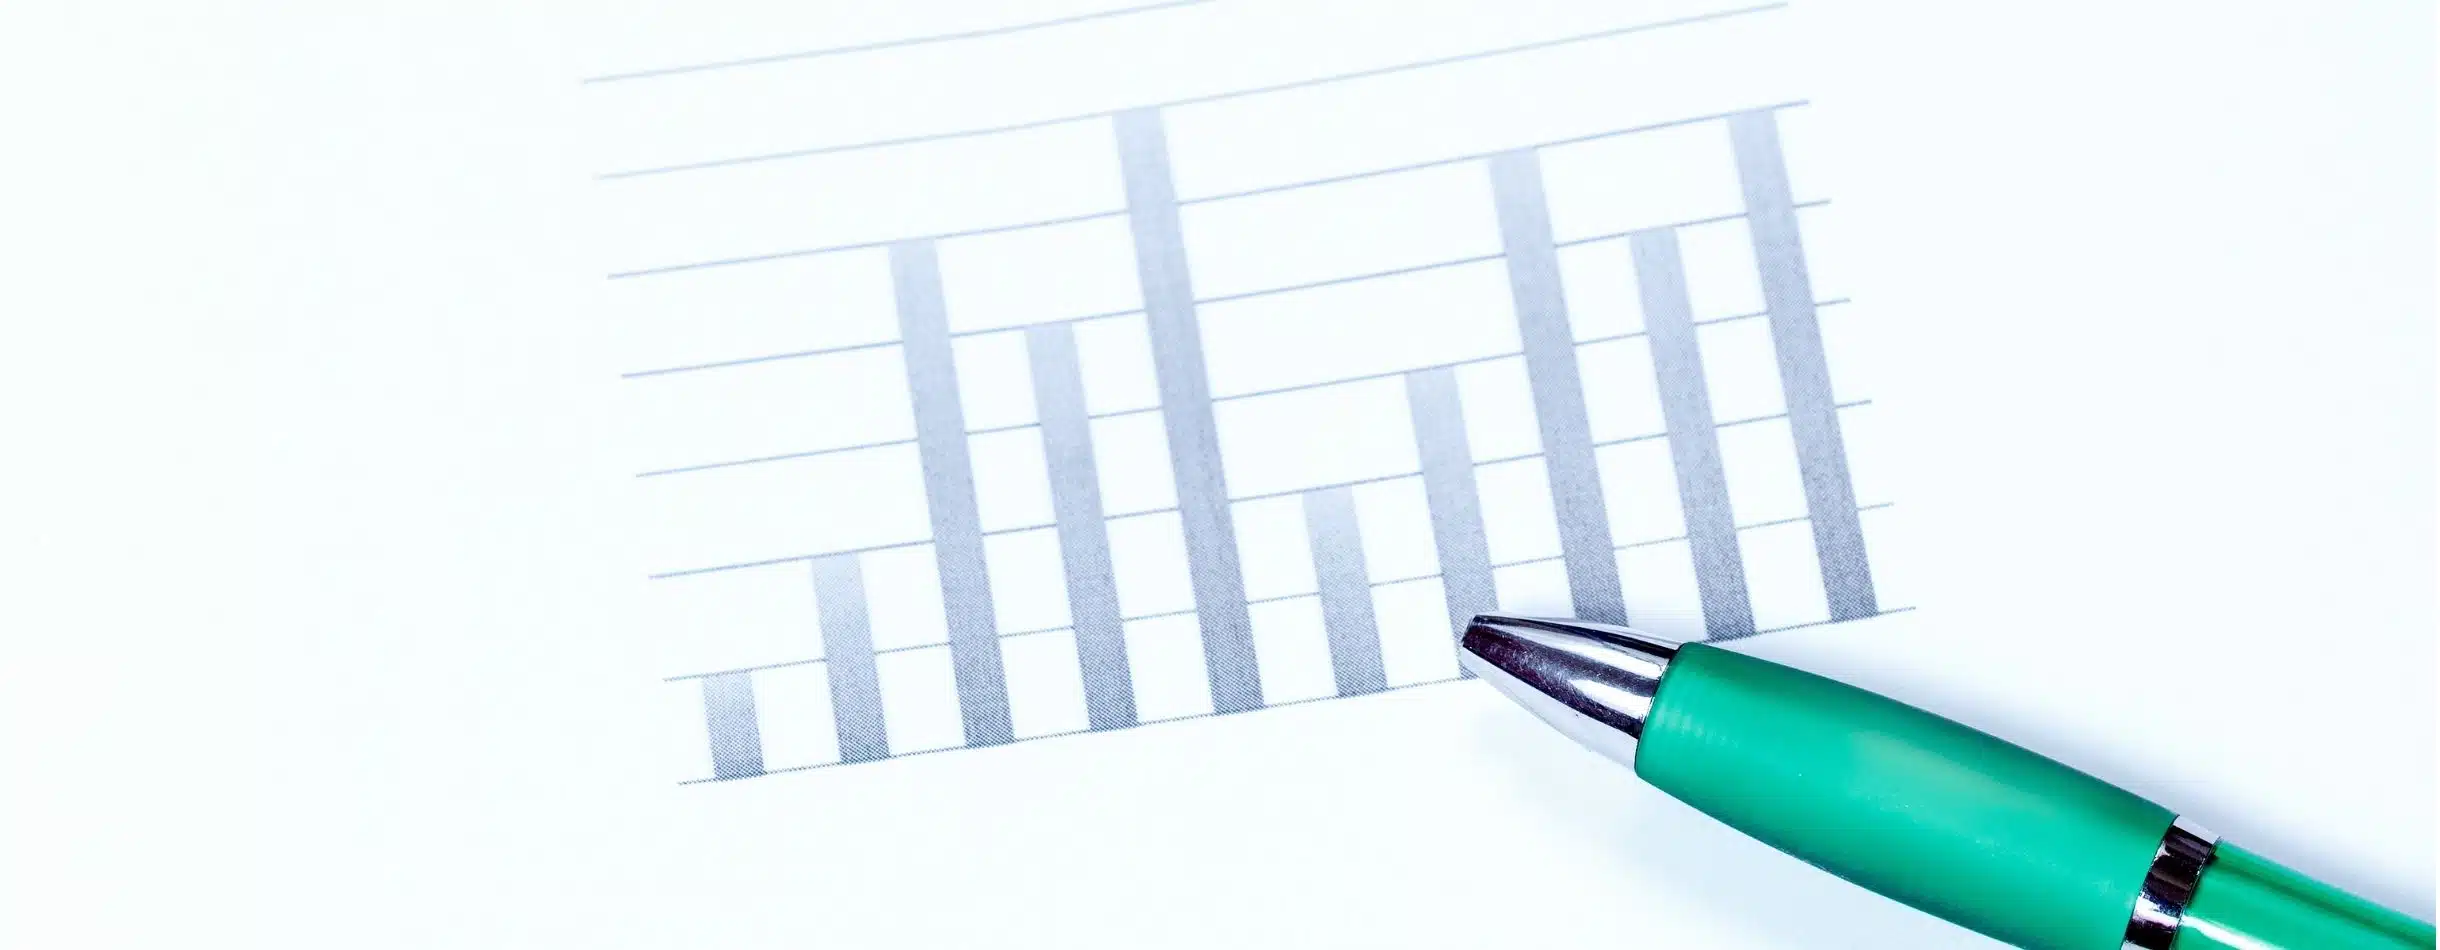 A pen is laid on a piece of paper depicting a bar chart